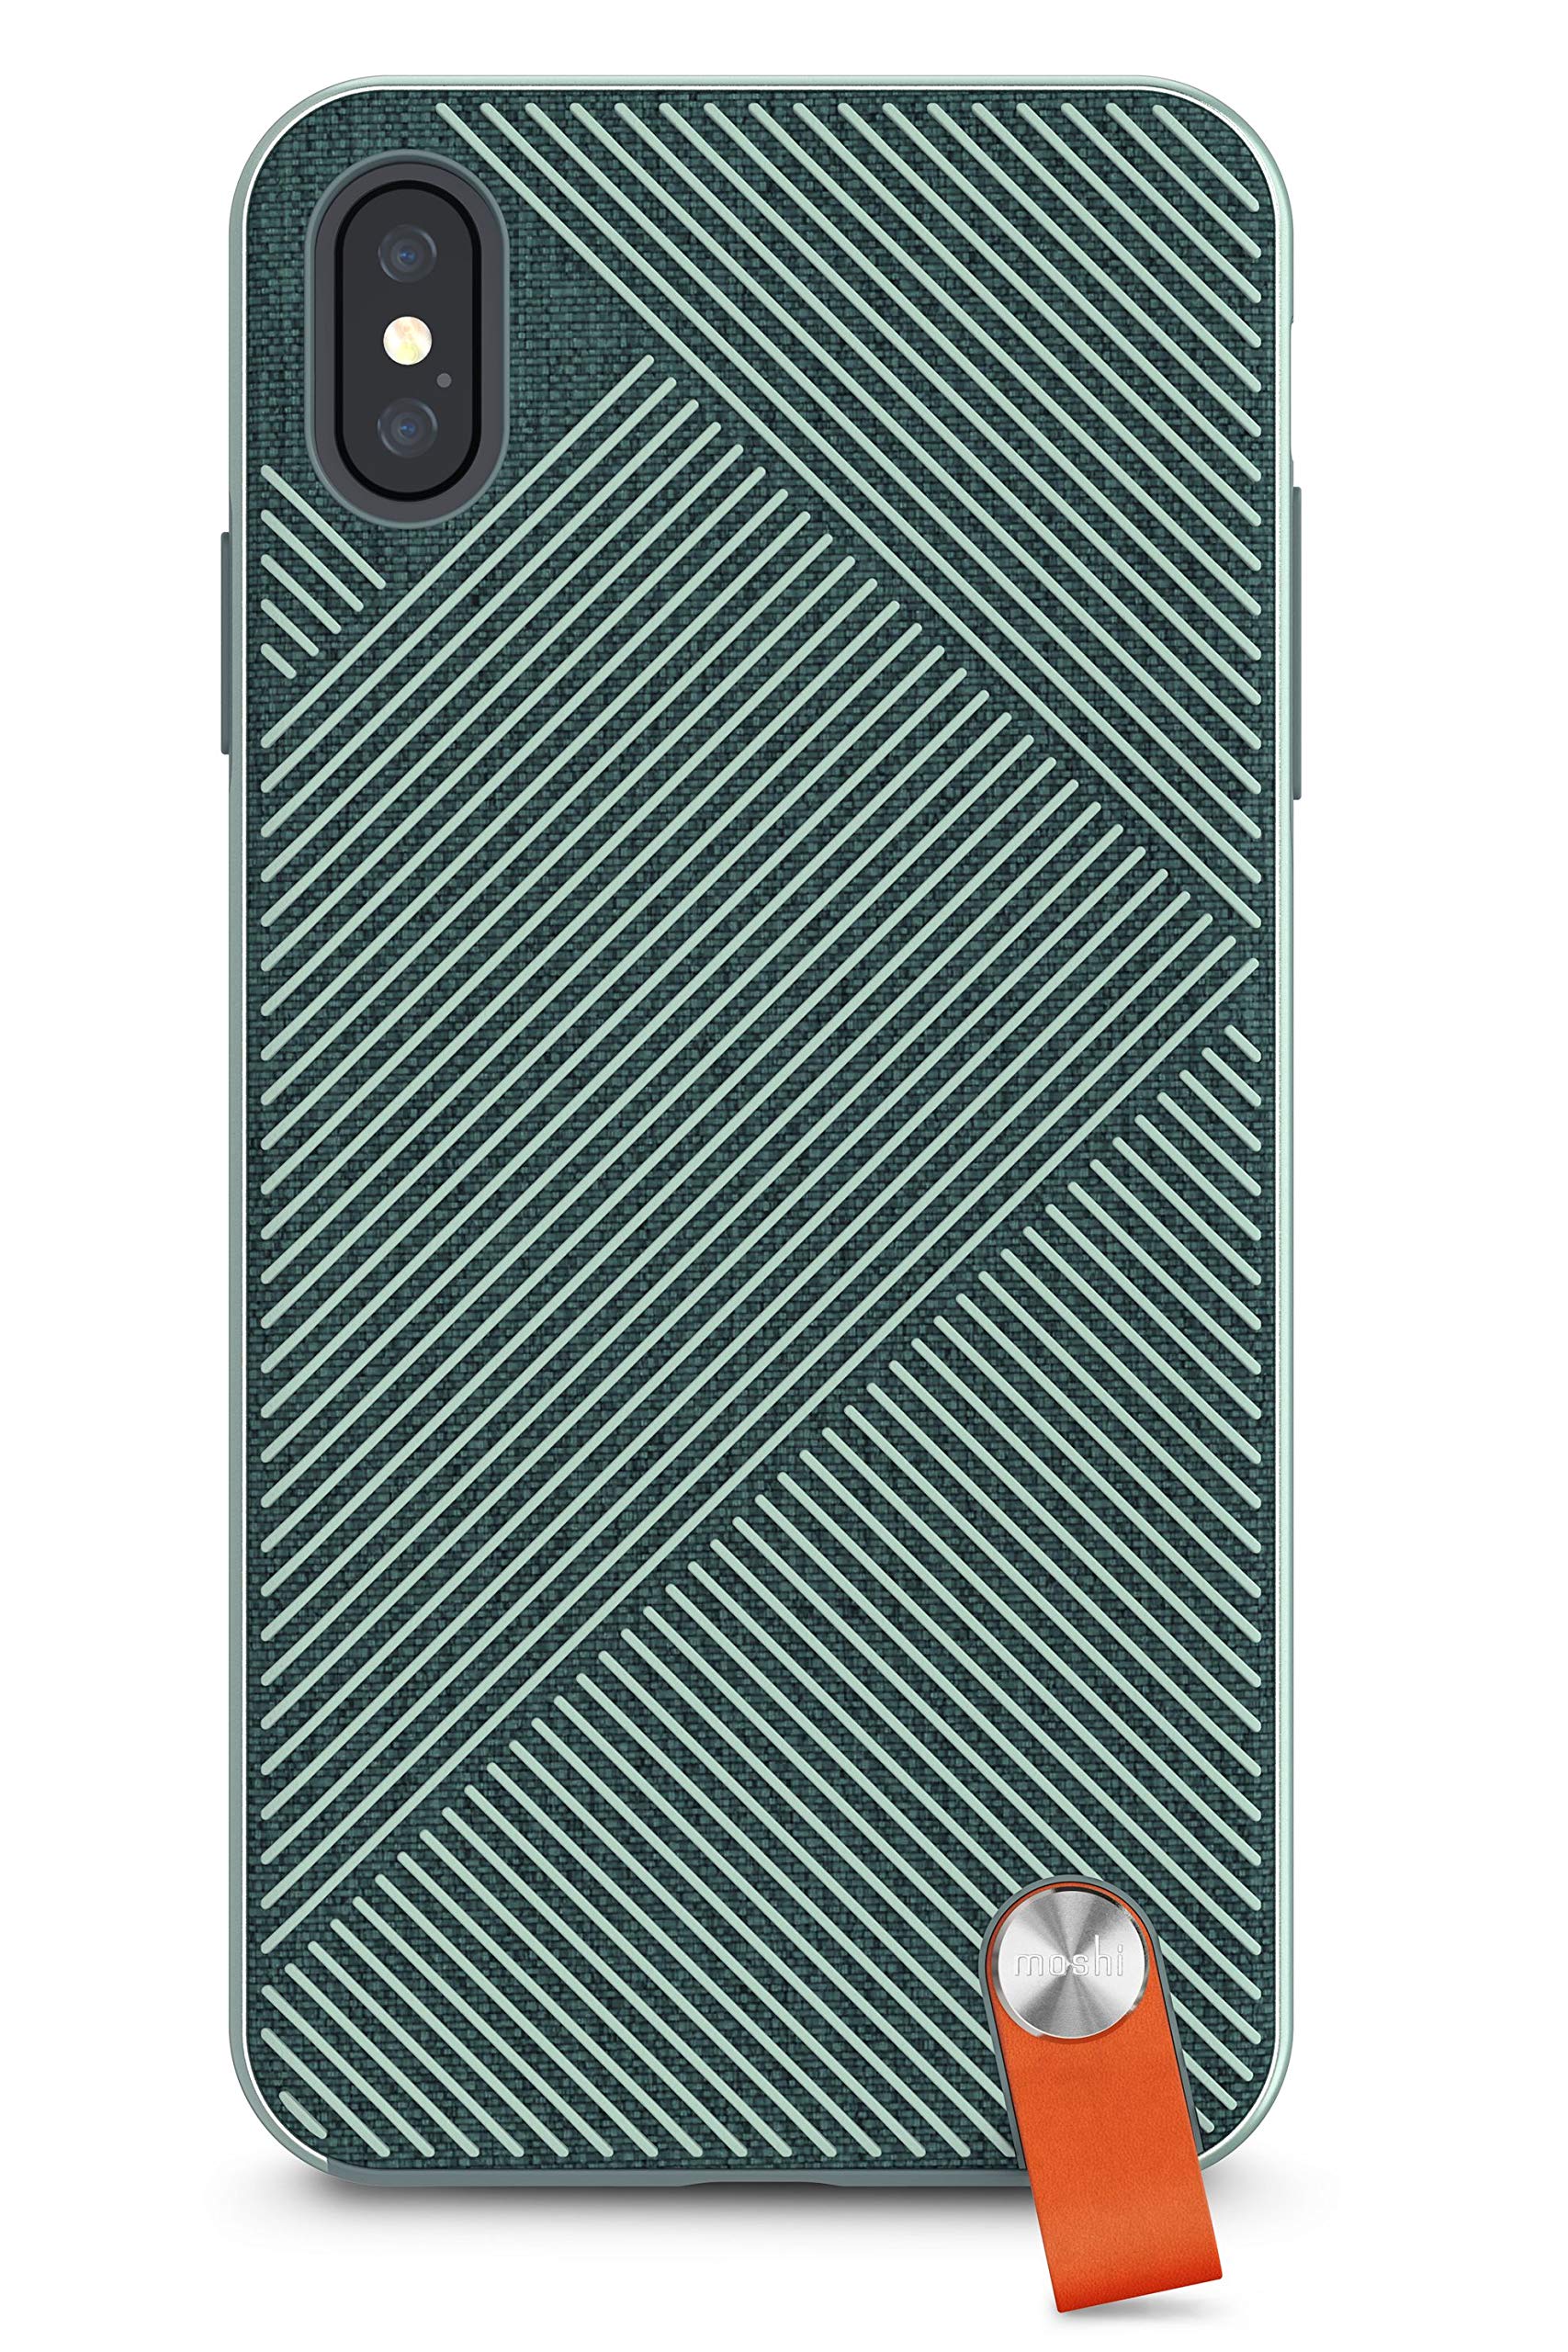 Moshi Altra Case For iPhone Xs Max - Mint Green